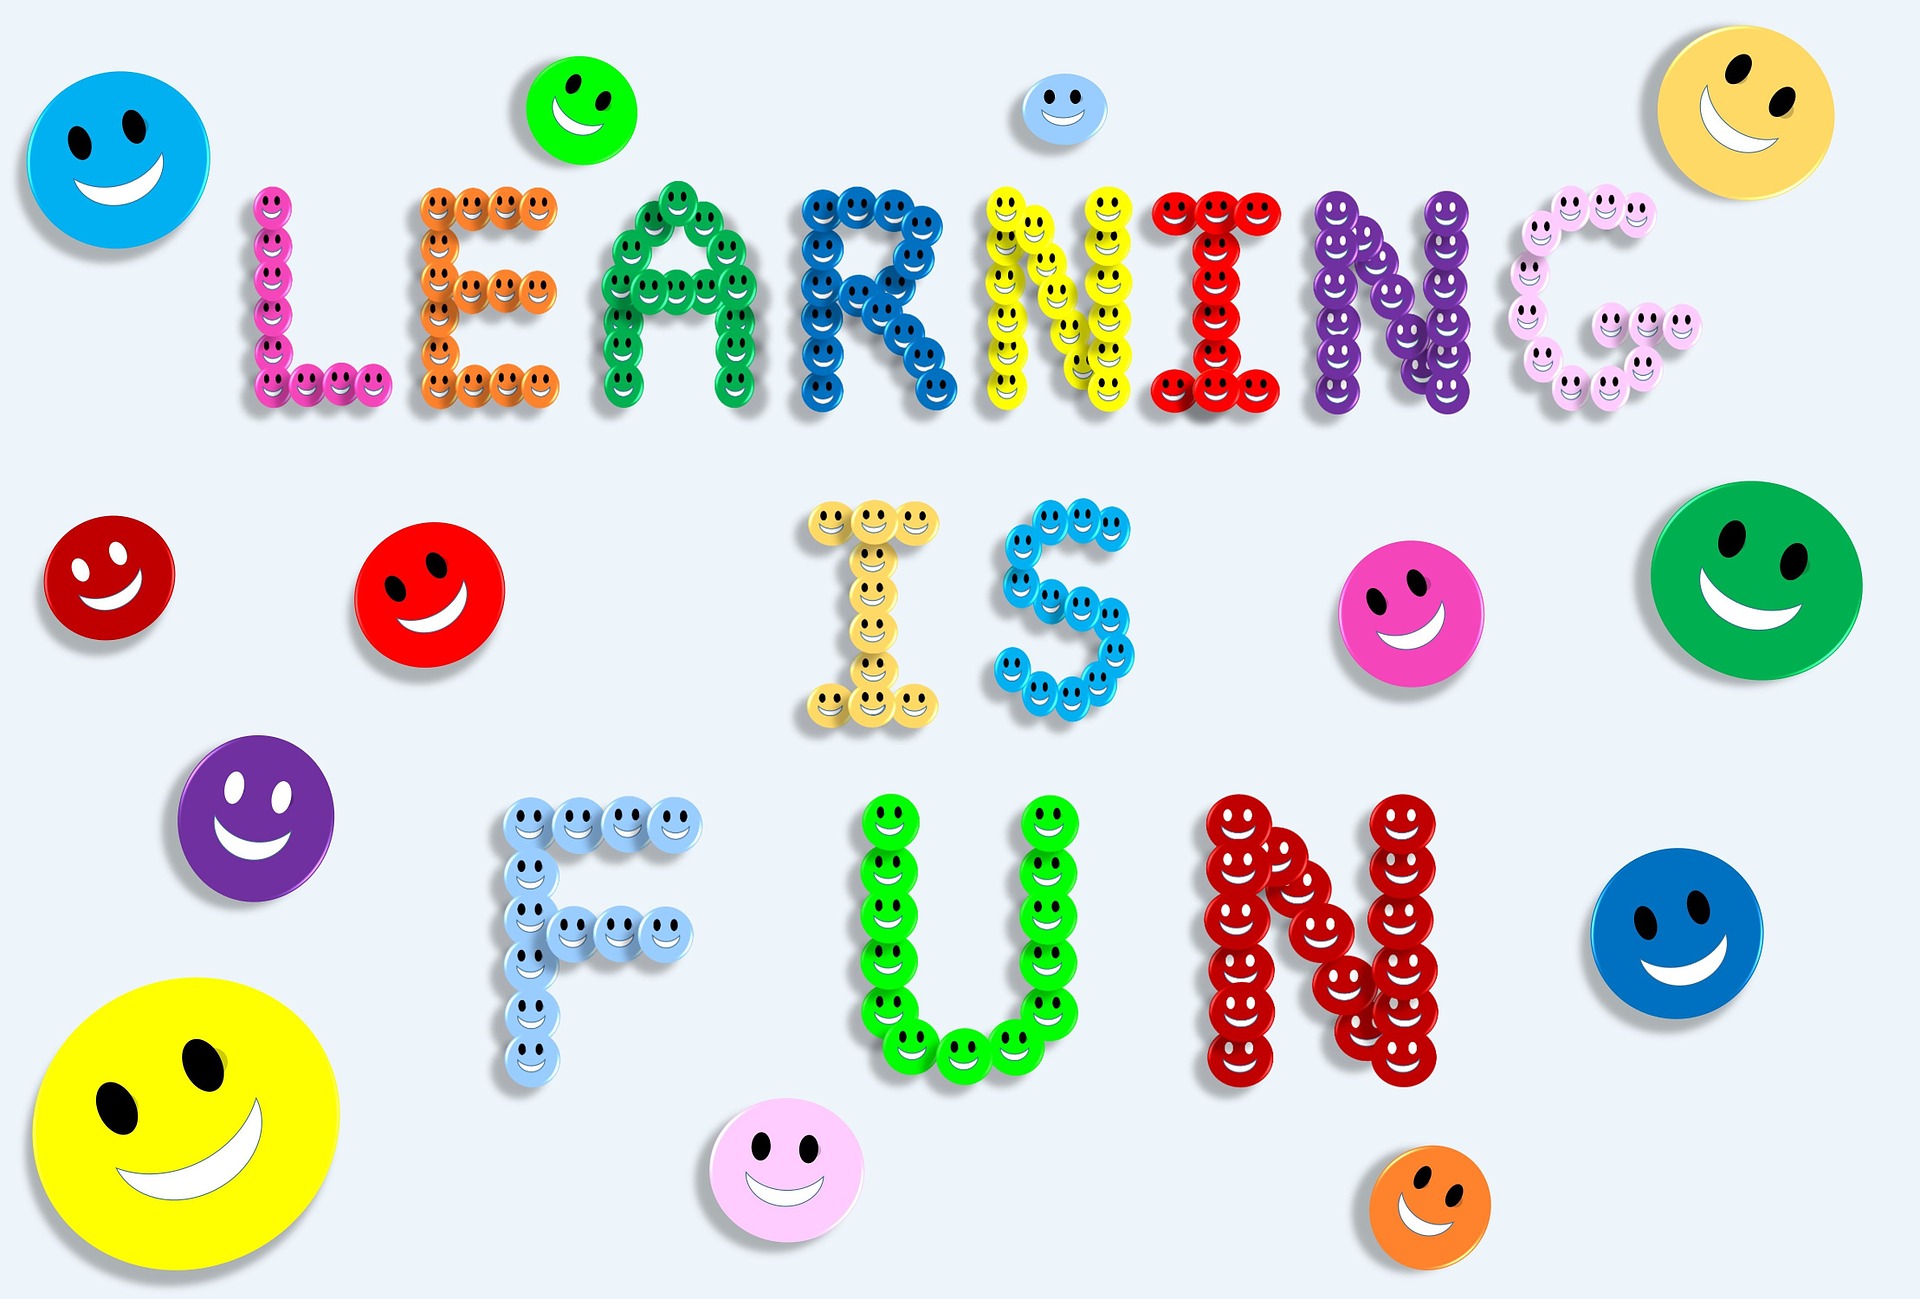 Learning is fun with smiley faces